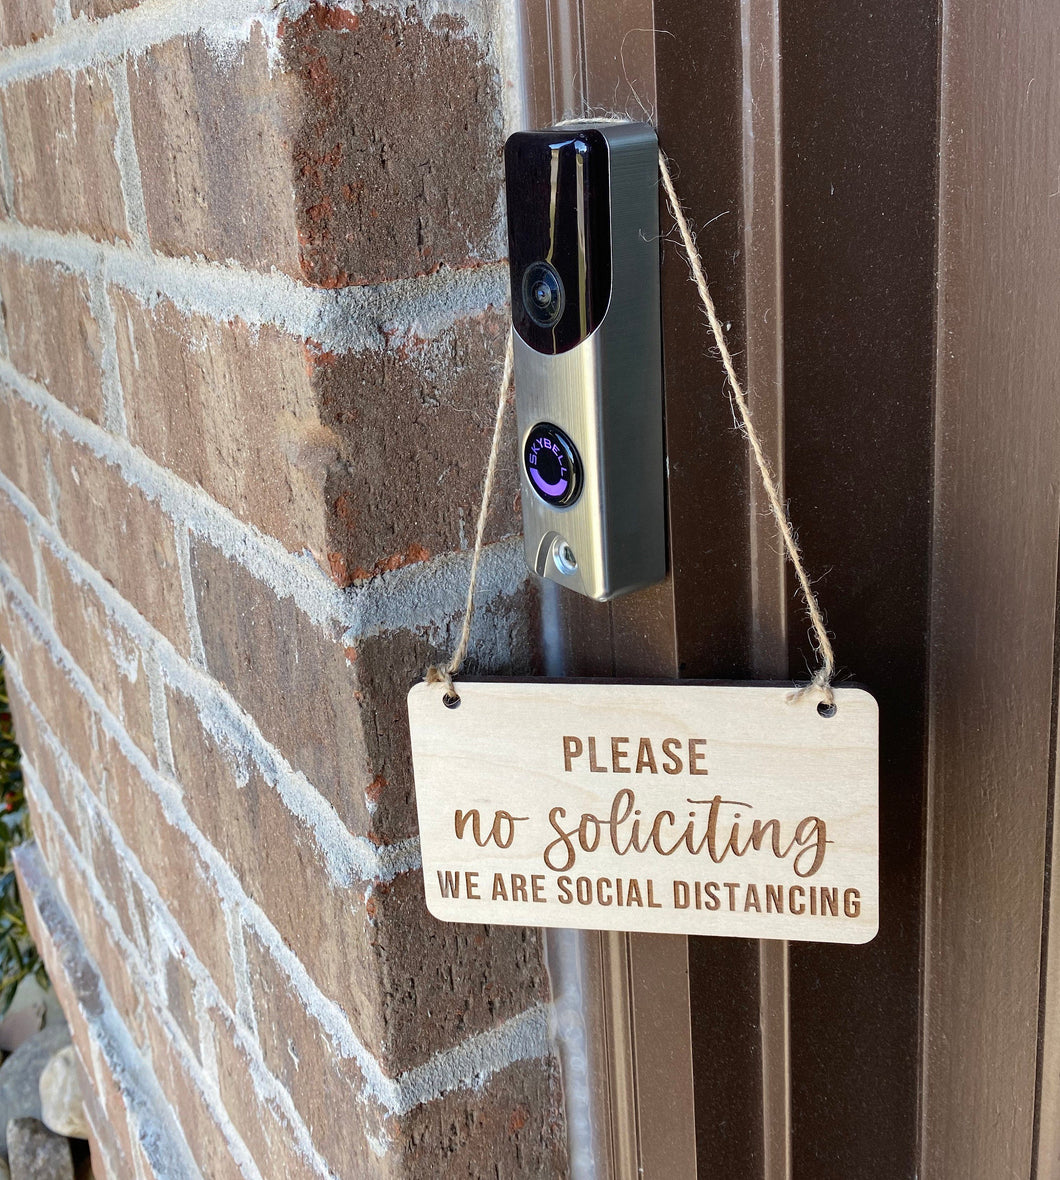 Please No Soliciting We Are Social Distancing - Do Not Knock - Do Not Ring Doorbell